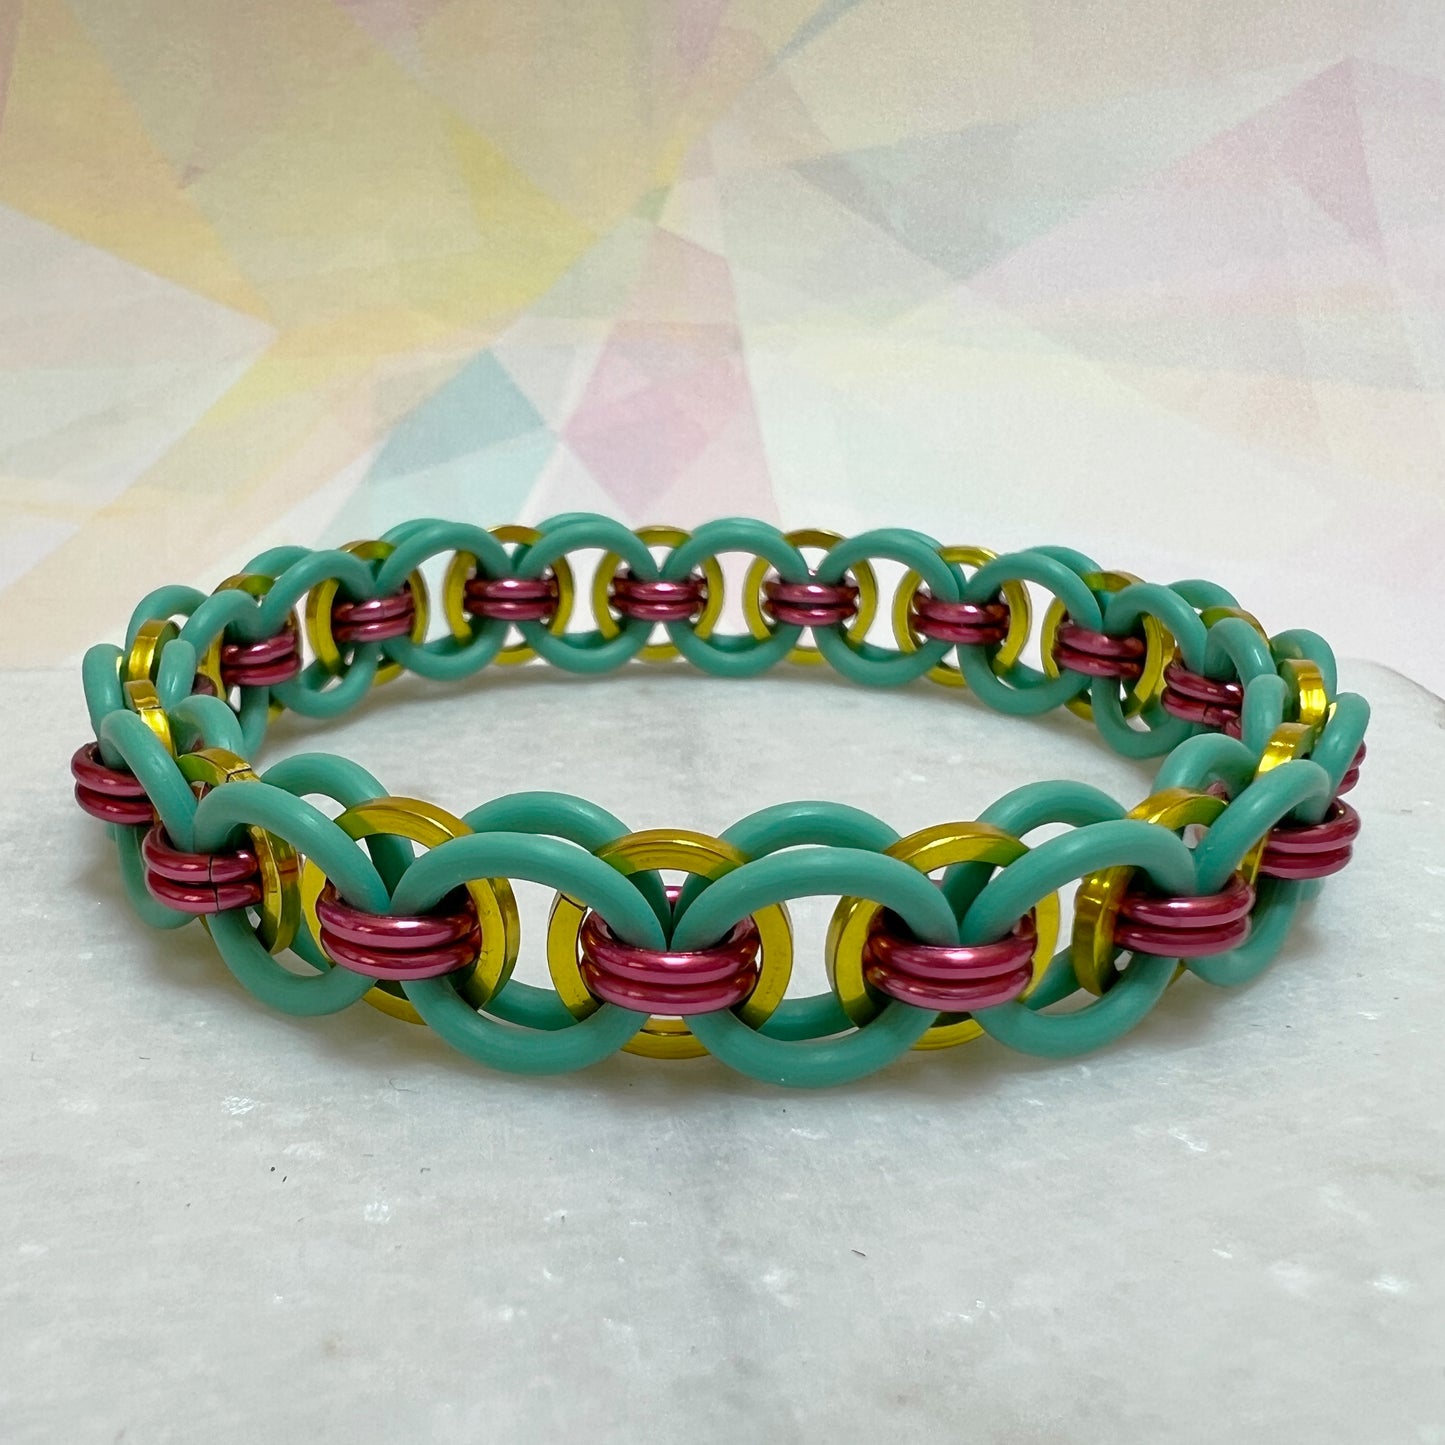 Helm Weave Stretch Bracelet with Square Rings Kit and FREE Video - Aqua, Yellow and Rose